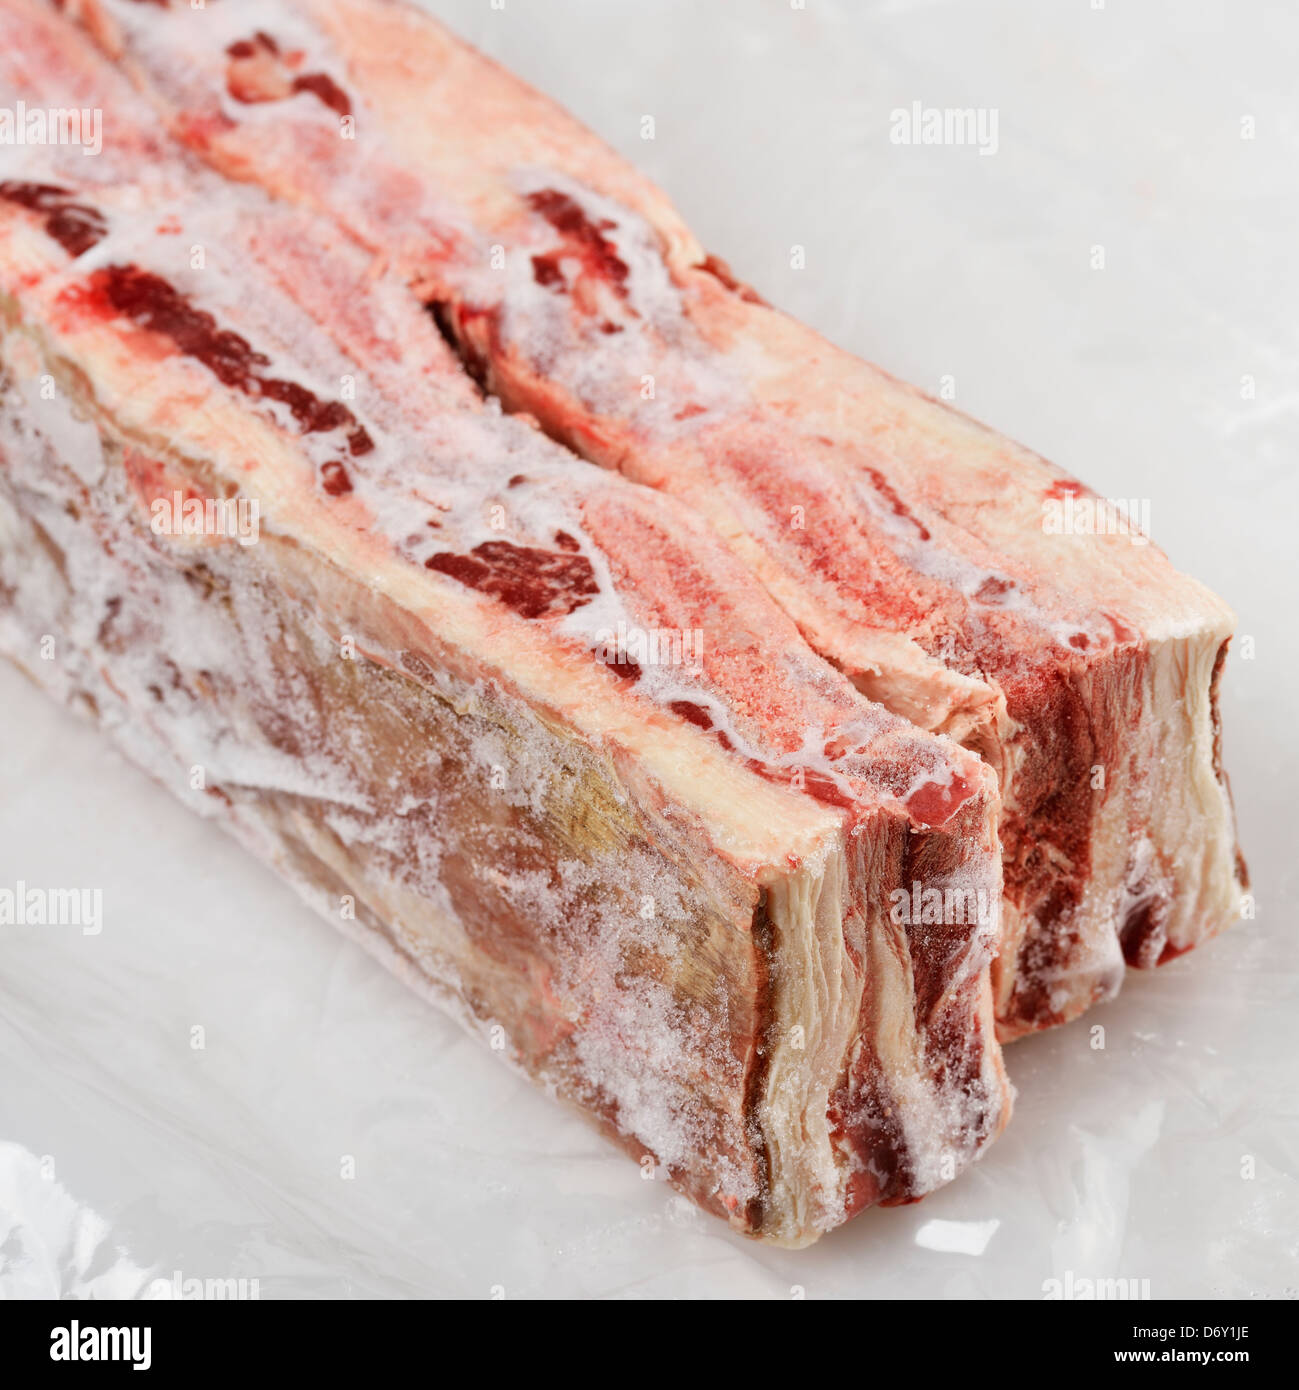 Frozen Beef Ribs On A Plastic Package Stock Photo